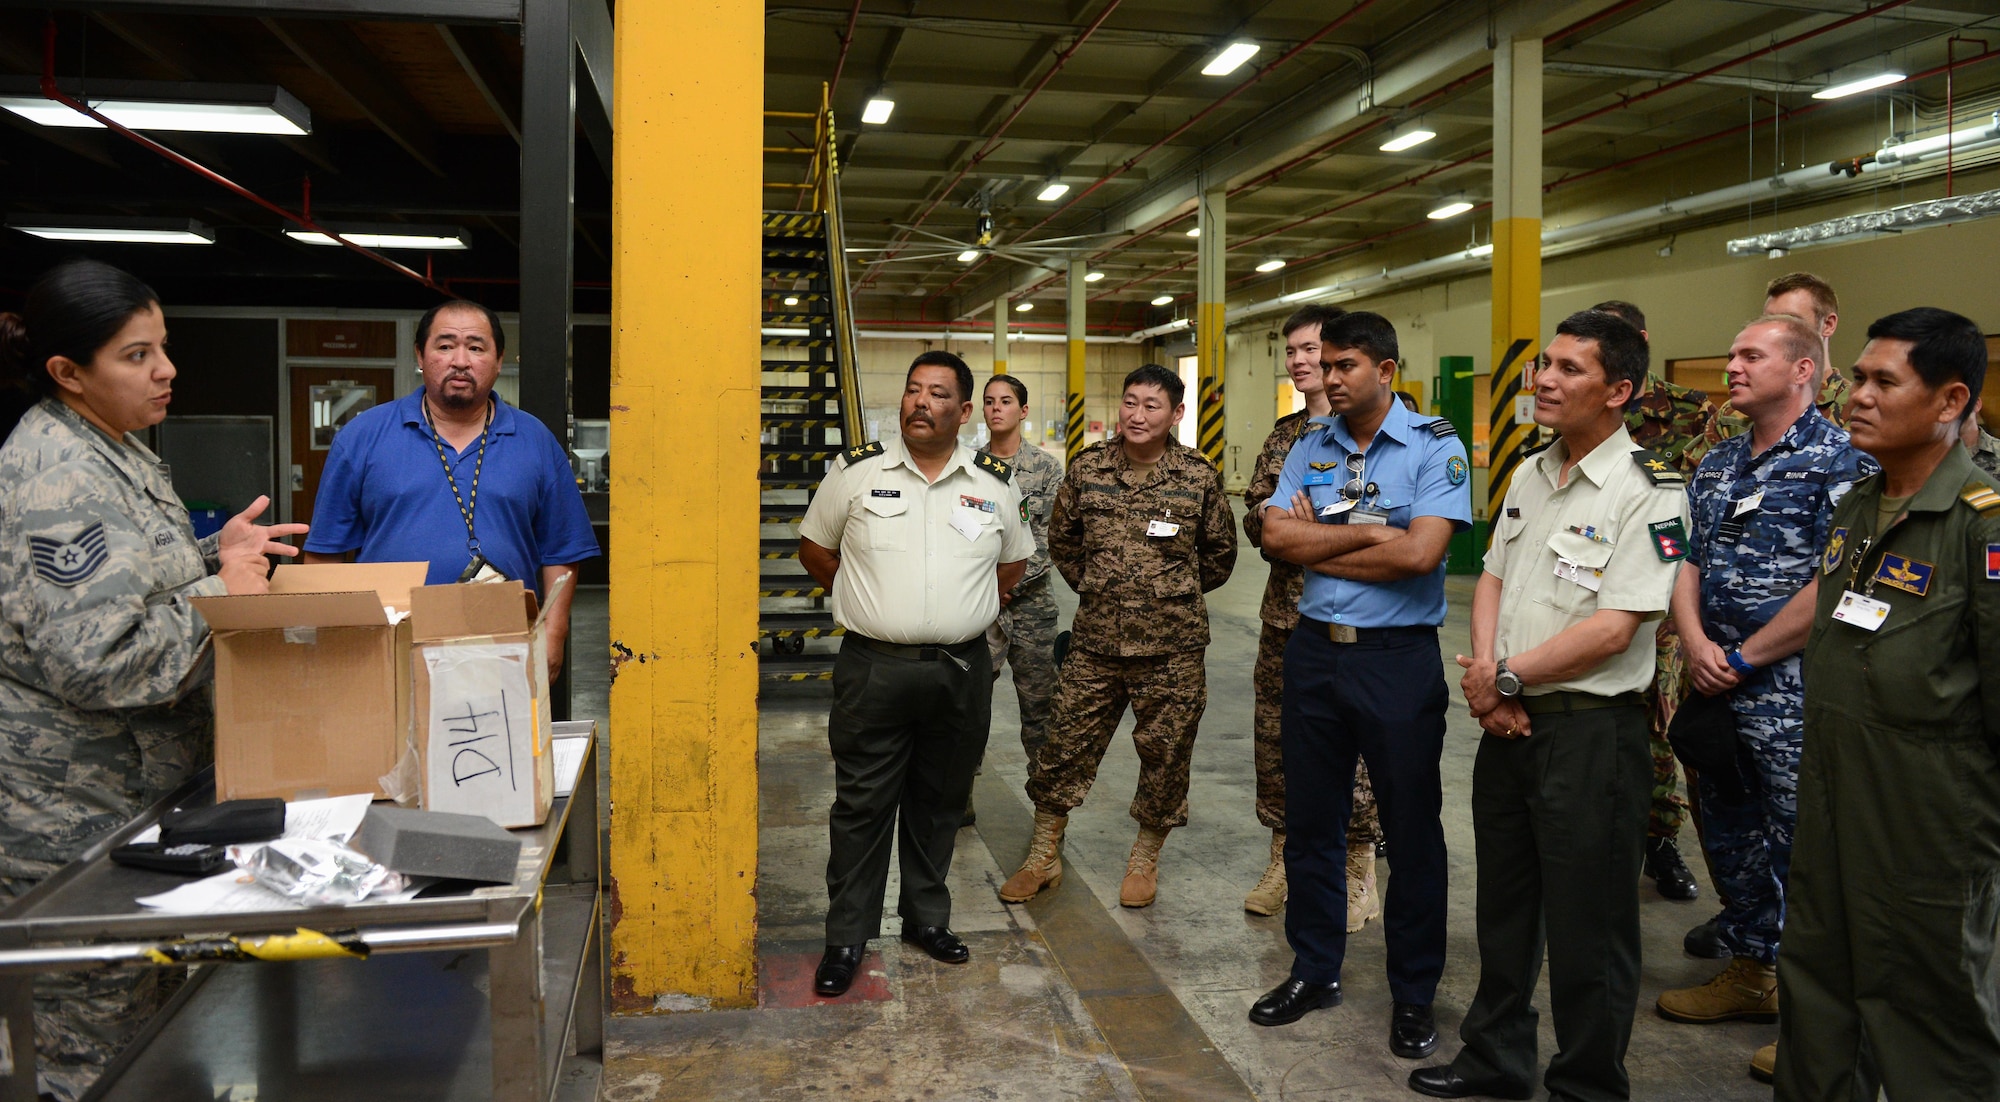 Tech. Sgt. Roxana Aguilar, 36th Mobility Response Squadron materiel management NCO in charge, left, discusses supply chain management operations with military logistics and maintenance experts during Pacific Agility 16-1, March 17, 2016, at Andersen Air Force Base, Guam. Pacific Agility is a multilateral U.S. Pacific Agility is a Pacific Air Forces-led engagement focusing on a series of logistics subject-matter expert exchanges designed to increase partner capabilities, military relations and regional stability for the Indo-Asia-Pacific region. The four-day program focused on various topics such as logistics, aircraft maintenance, air/ground transportation, humanitarian assistance/disaster relief and contingency operations. (U.S. Air Force photo by Airman 1st Class Arielle Vasquez/Released)